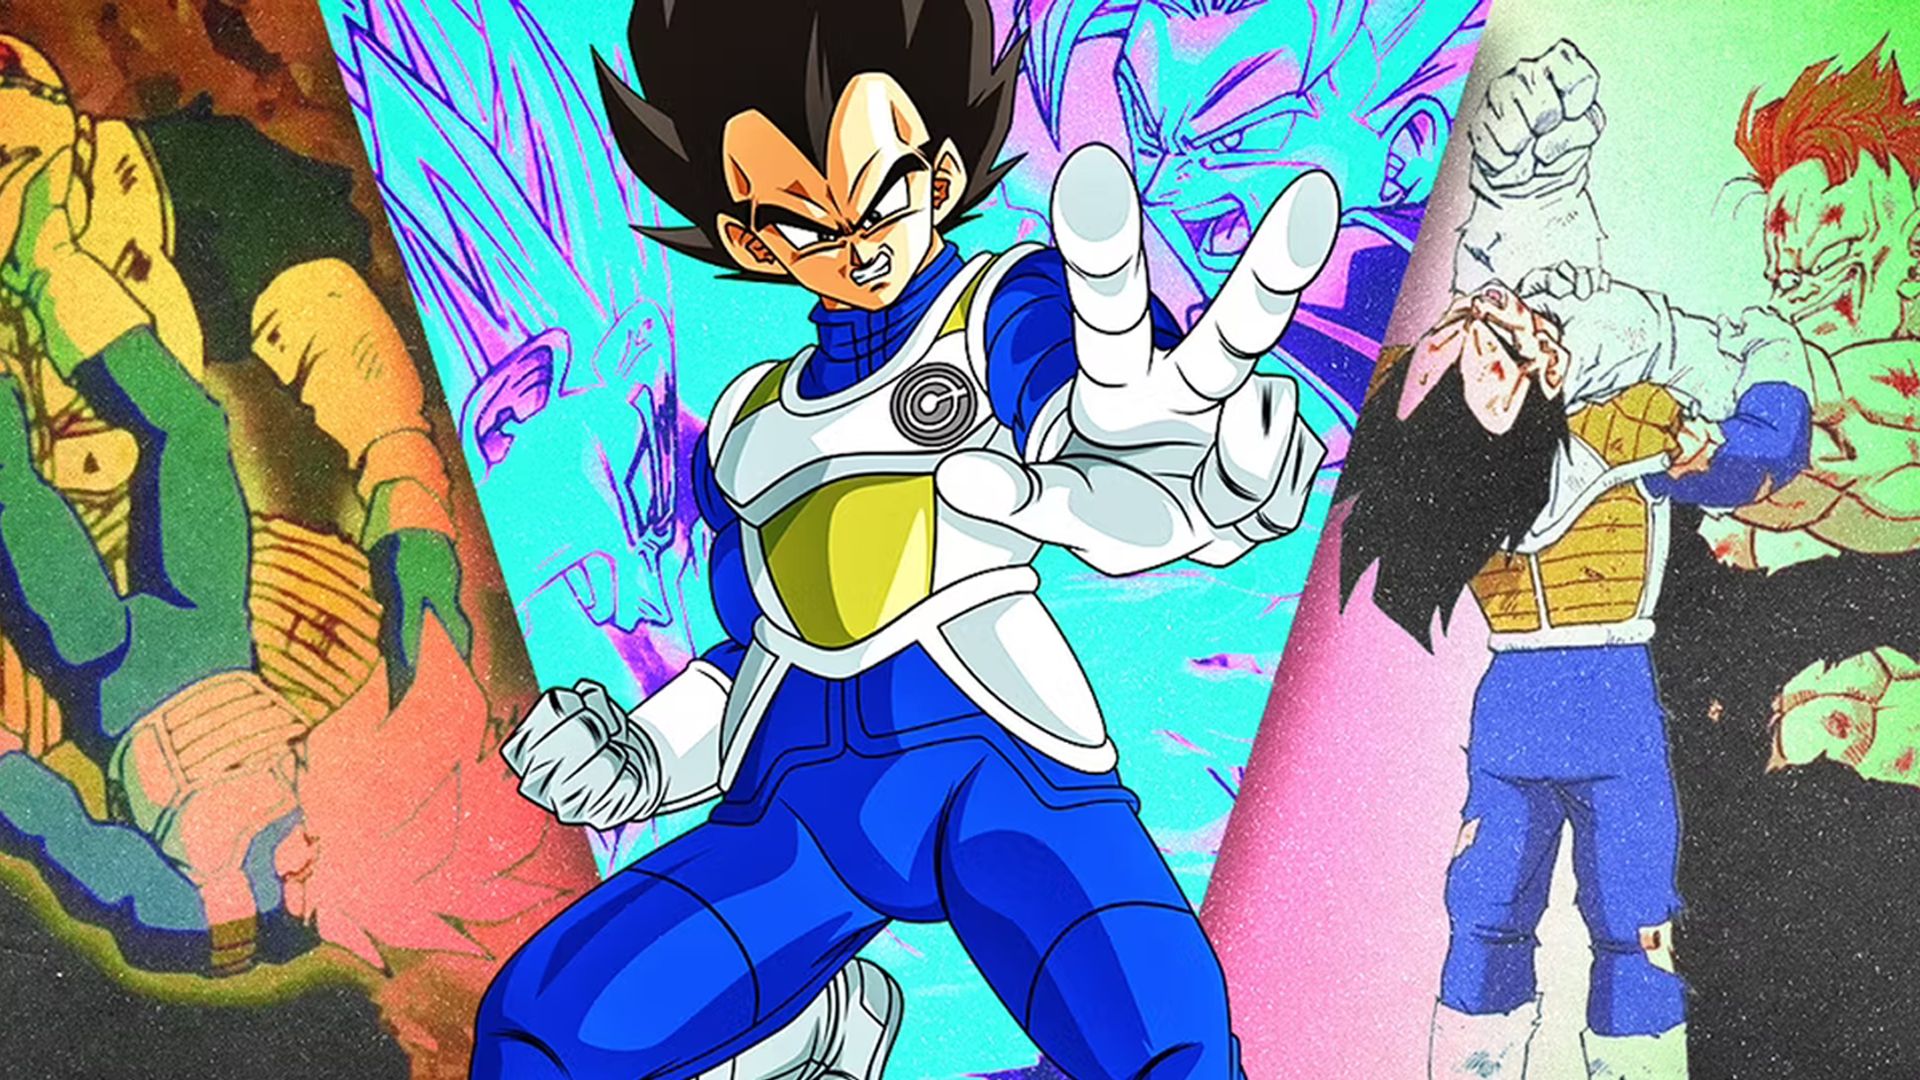 Custom Image of Vegeta in different positions and fights in Dragon Ball Z